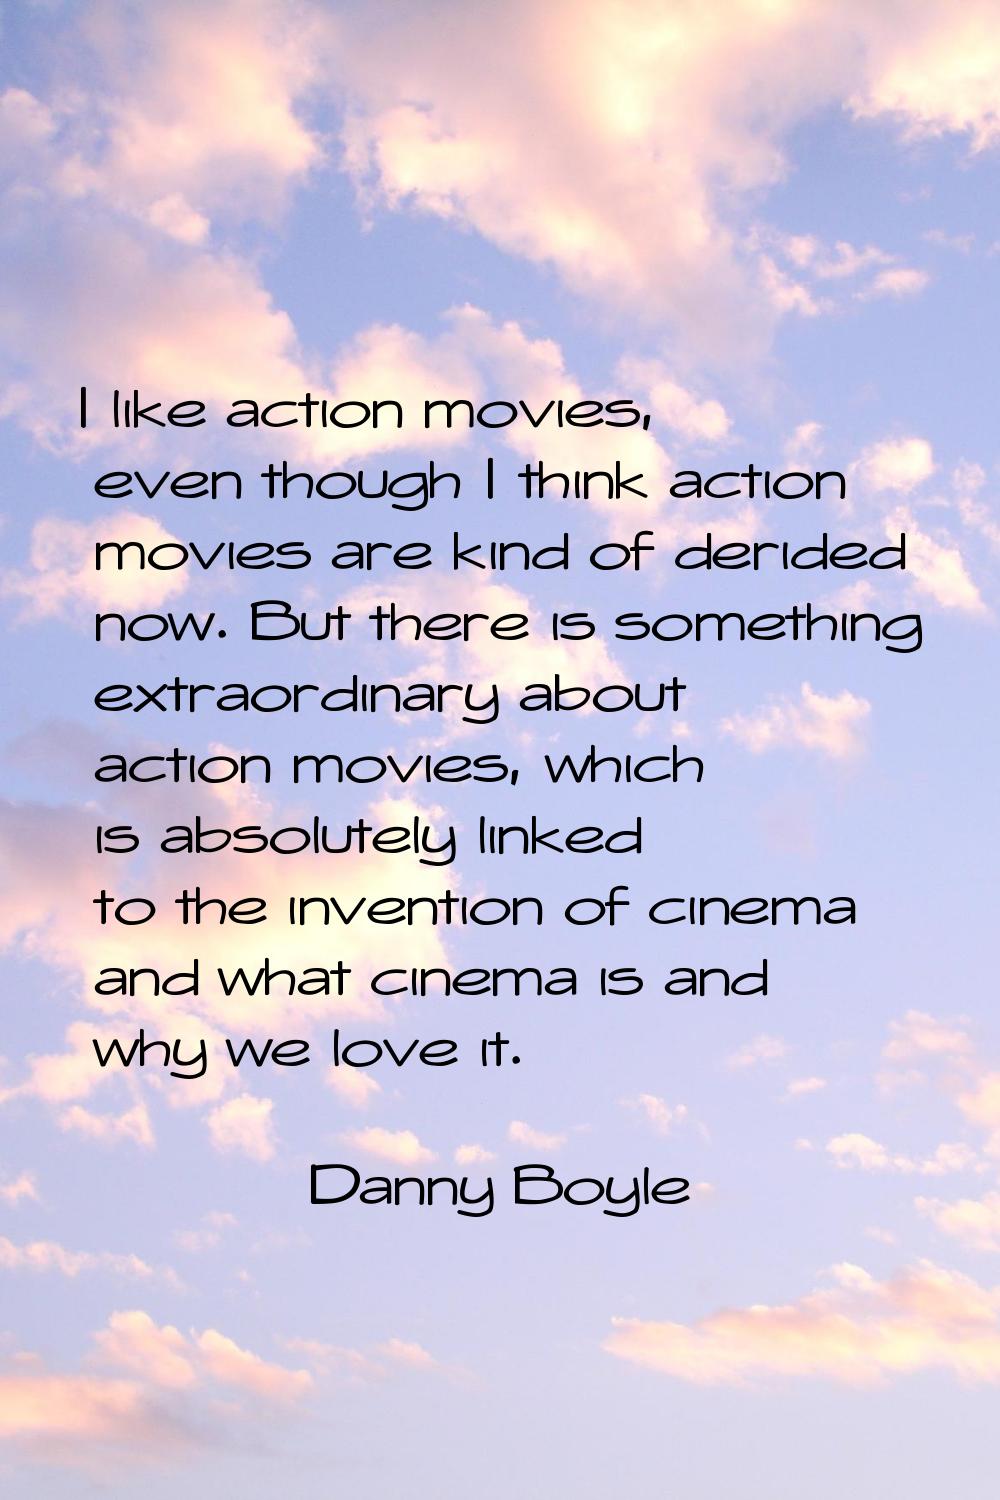 I like action movies, even though I think action movies are kind of derided now. But there is somet